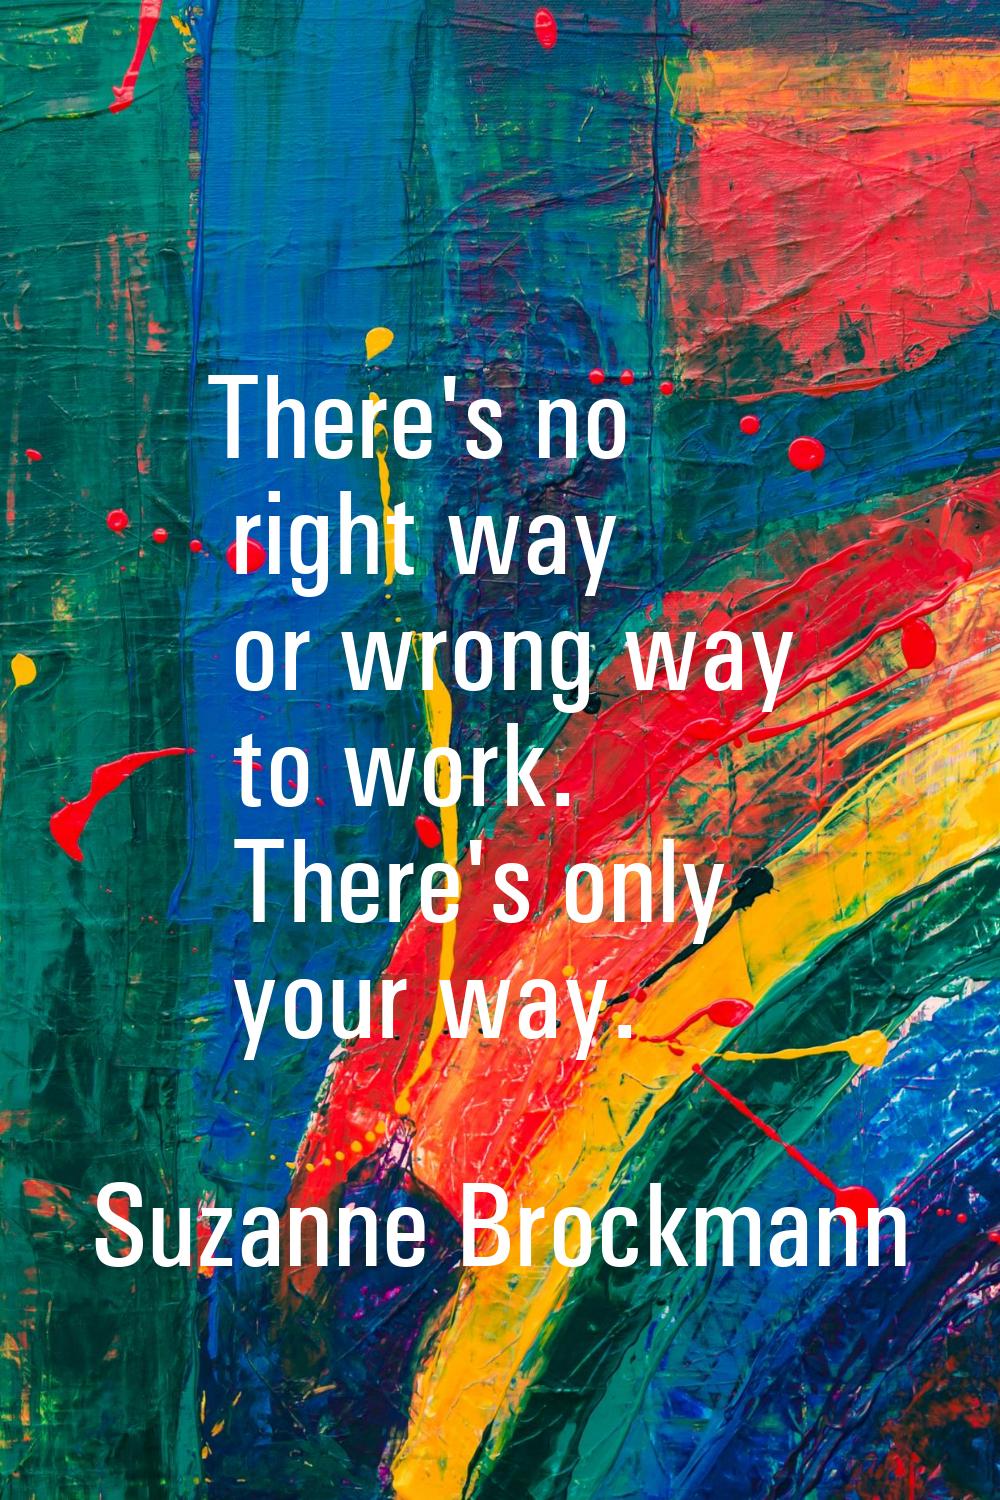 There's no right way or wrong way to work. There's only your way.